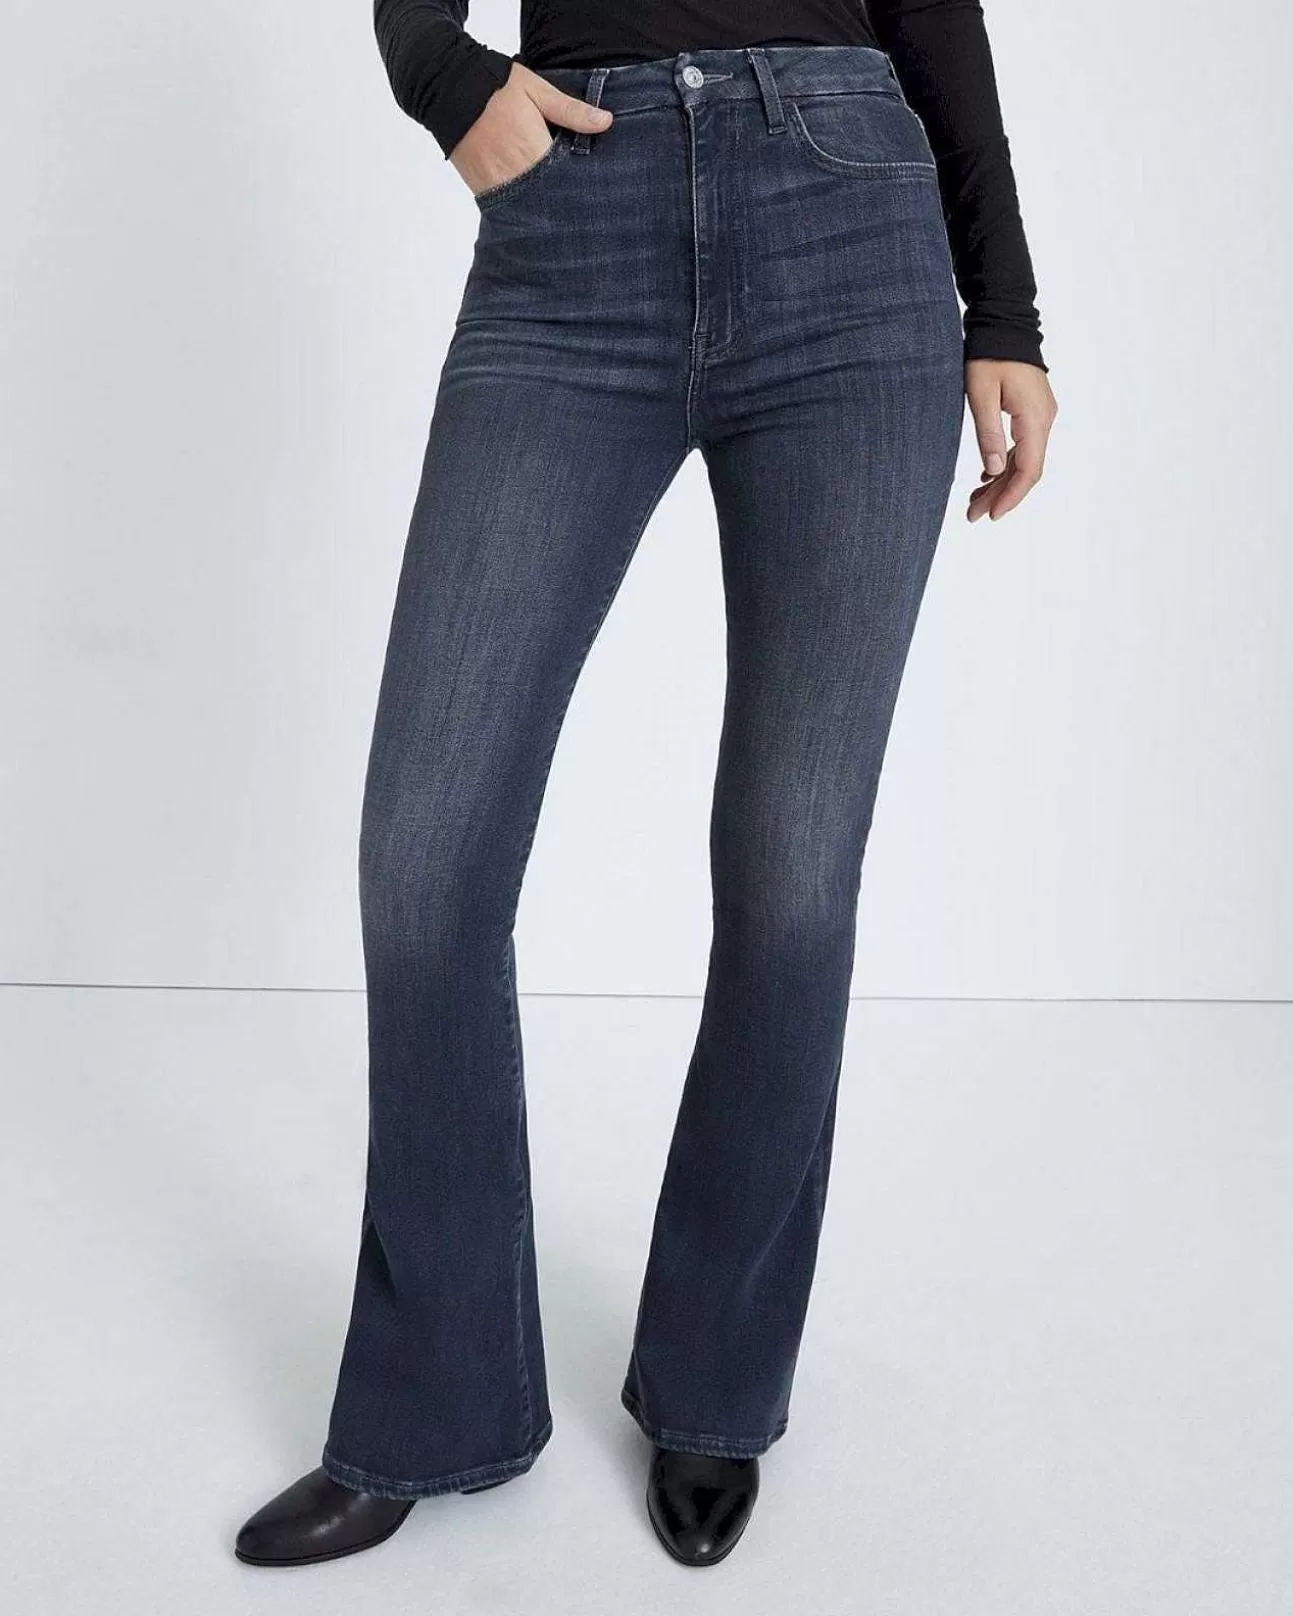 Jeans>7 For All Mankind No Filter Ultra High Rise Skinny Bootcut In Edelweis